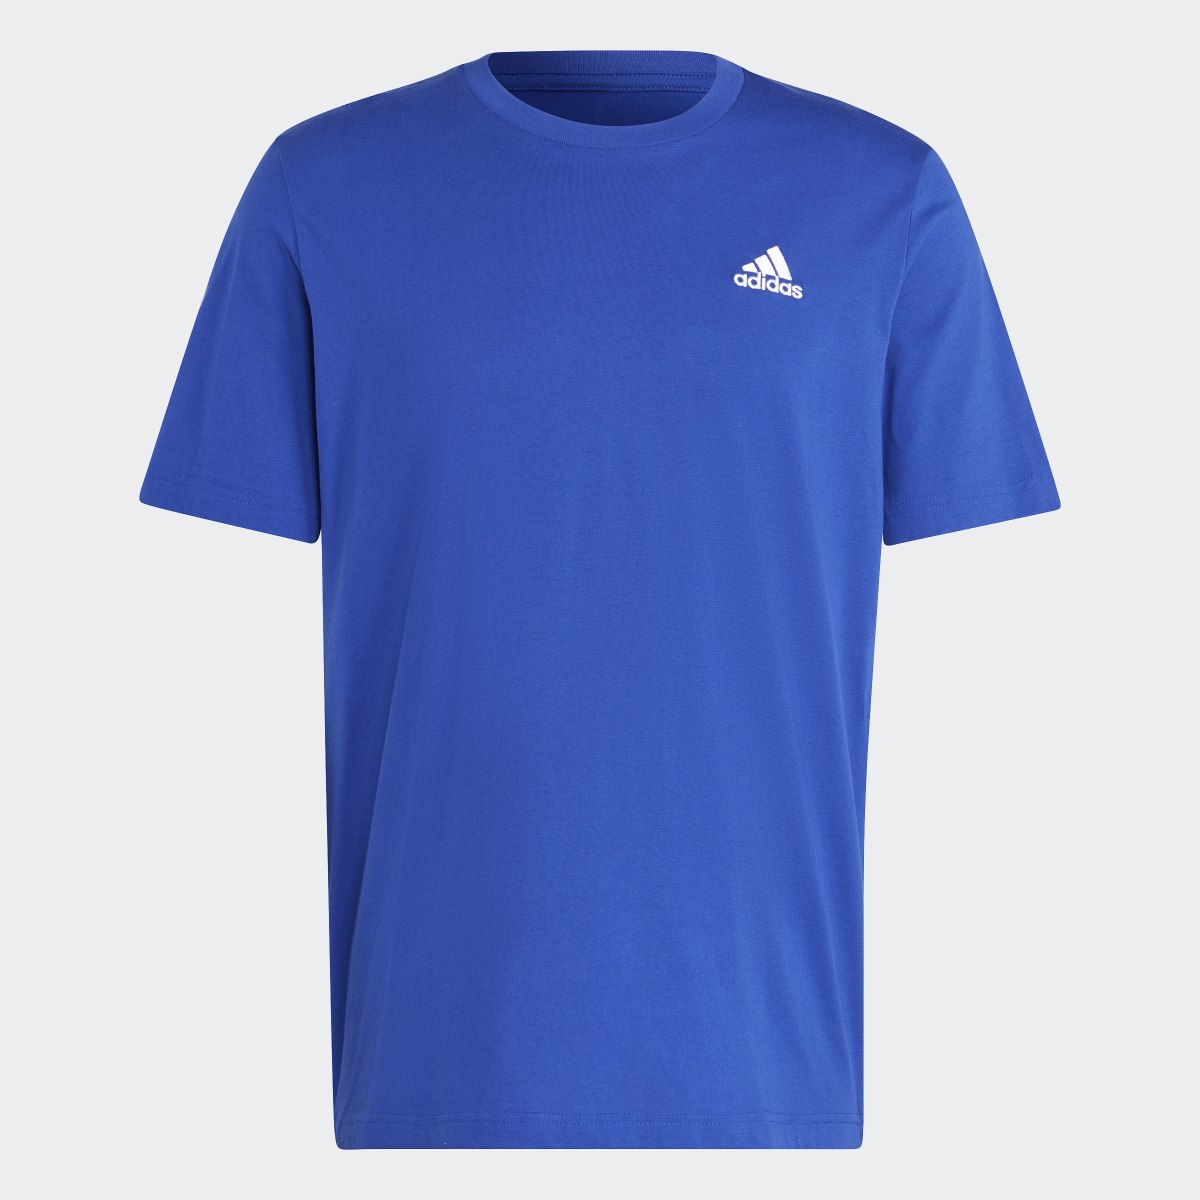 Adidas Essentials Single Jersey Embroidered Small Logo Tee. 5